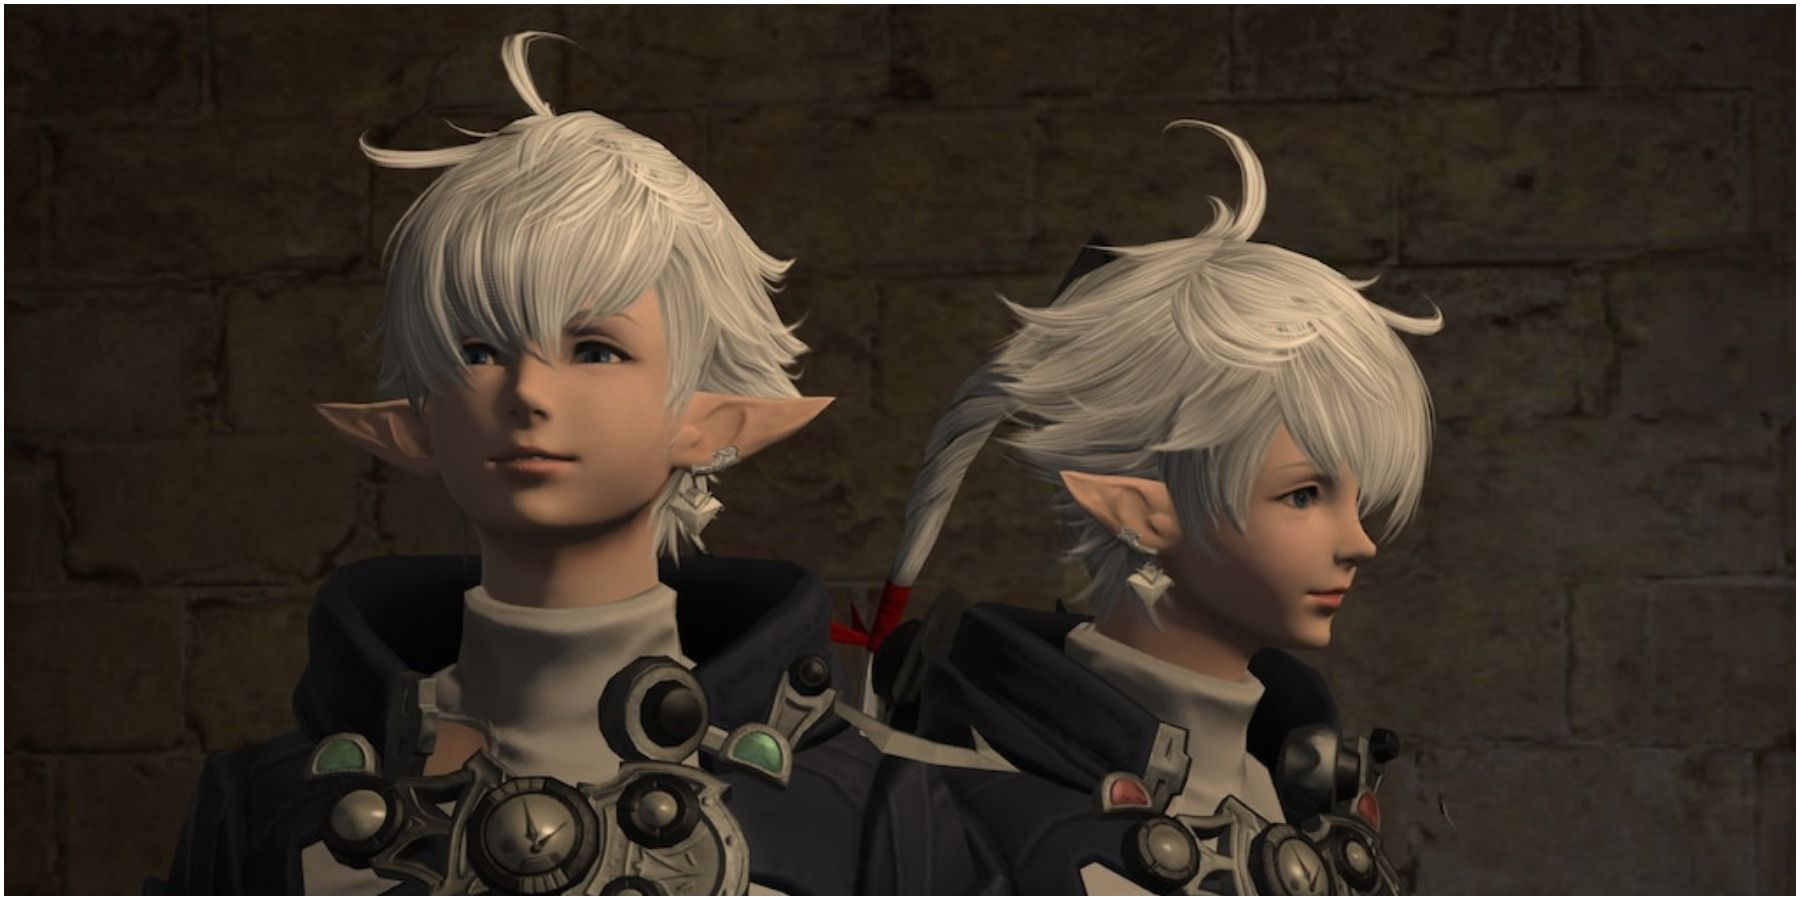 Alisaie and Alphanaud togther.